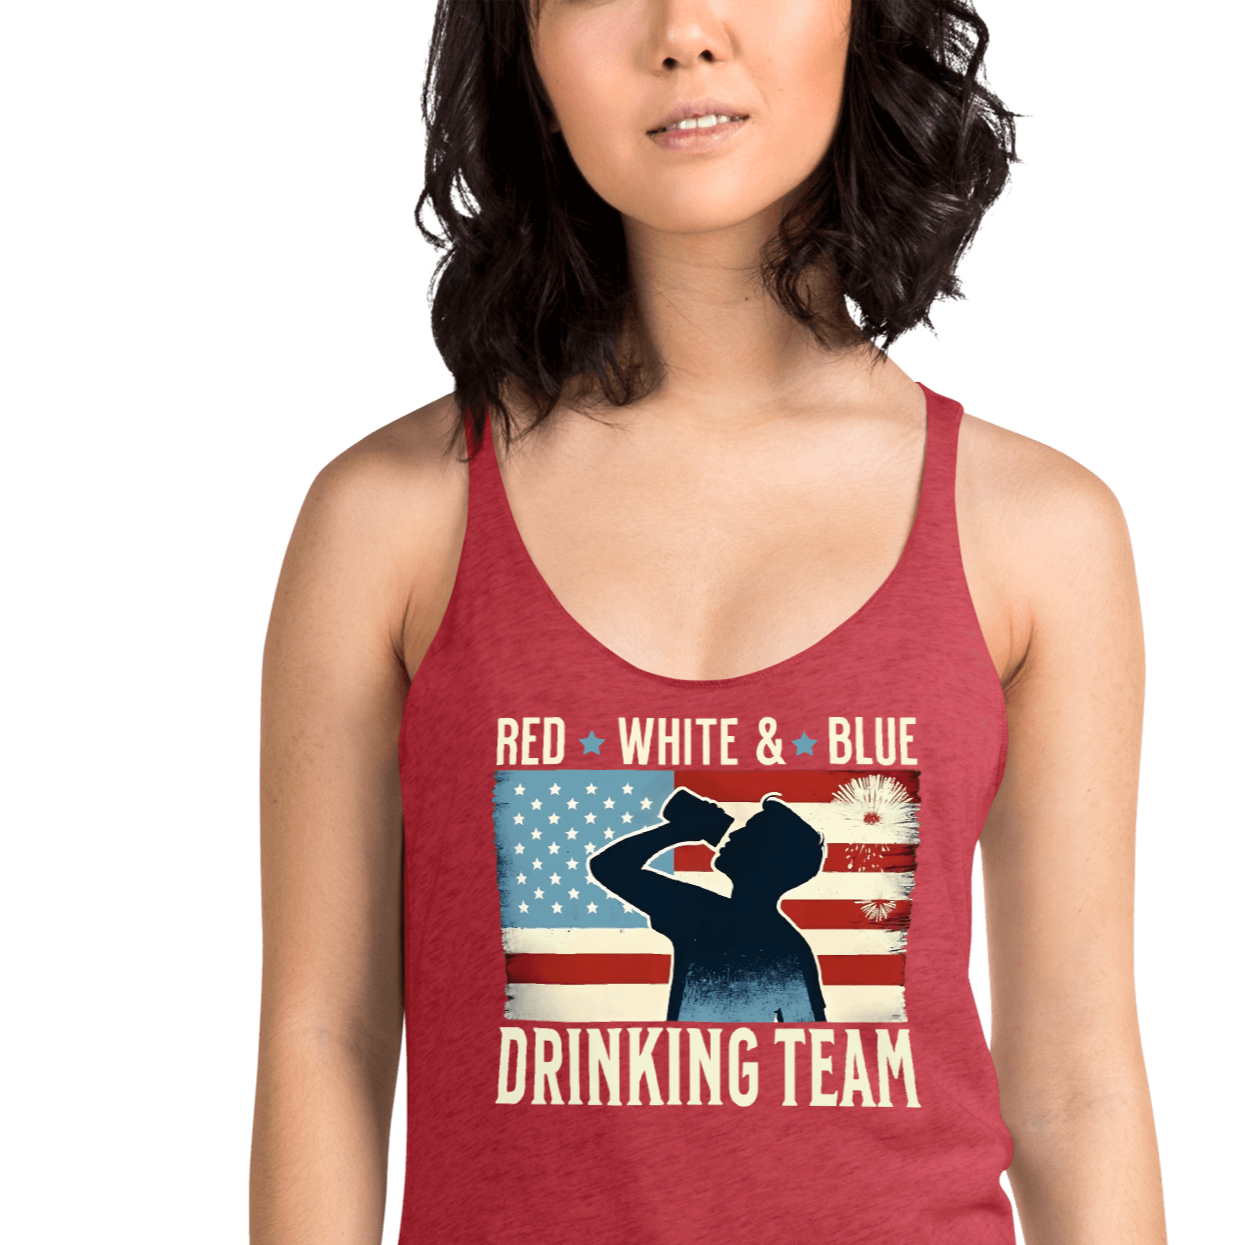 Racerback tank with Red White and Blue Drinking Team text, man drinking beer, and distressed American flag background. Perfect for 4th of July.